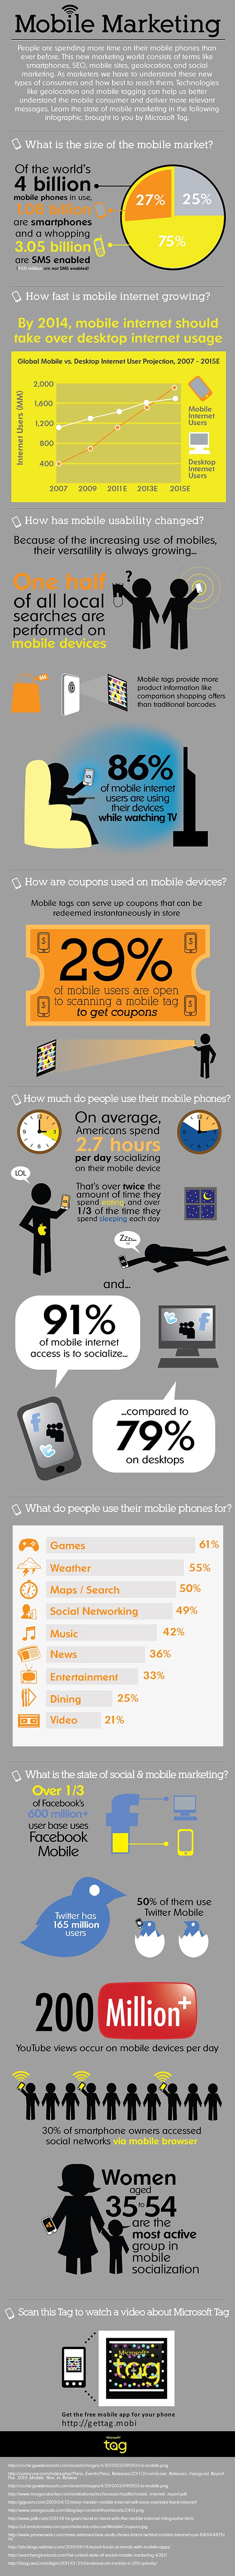 2011 Insane Mobile Marketing Facts & Trends